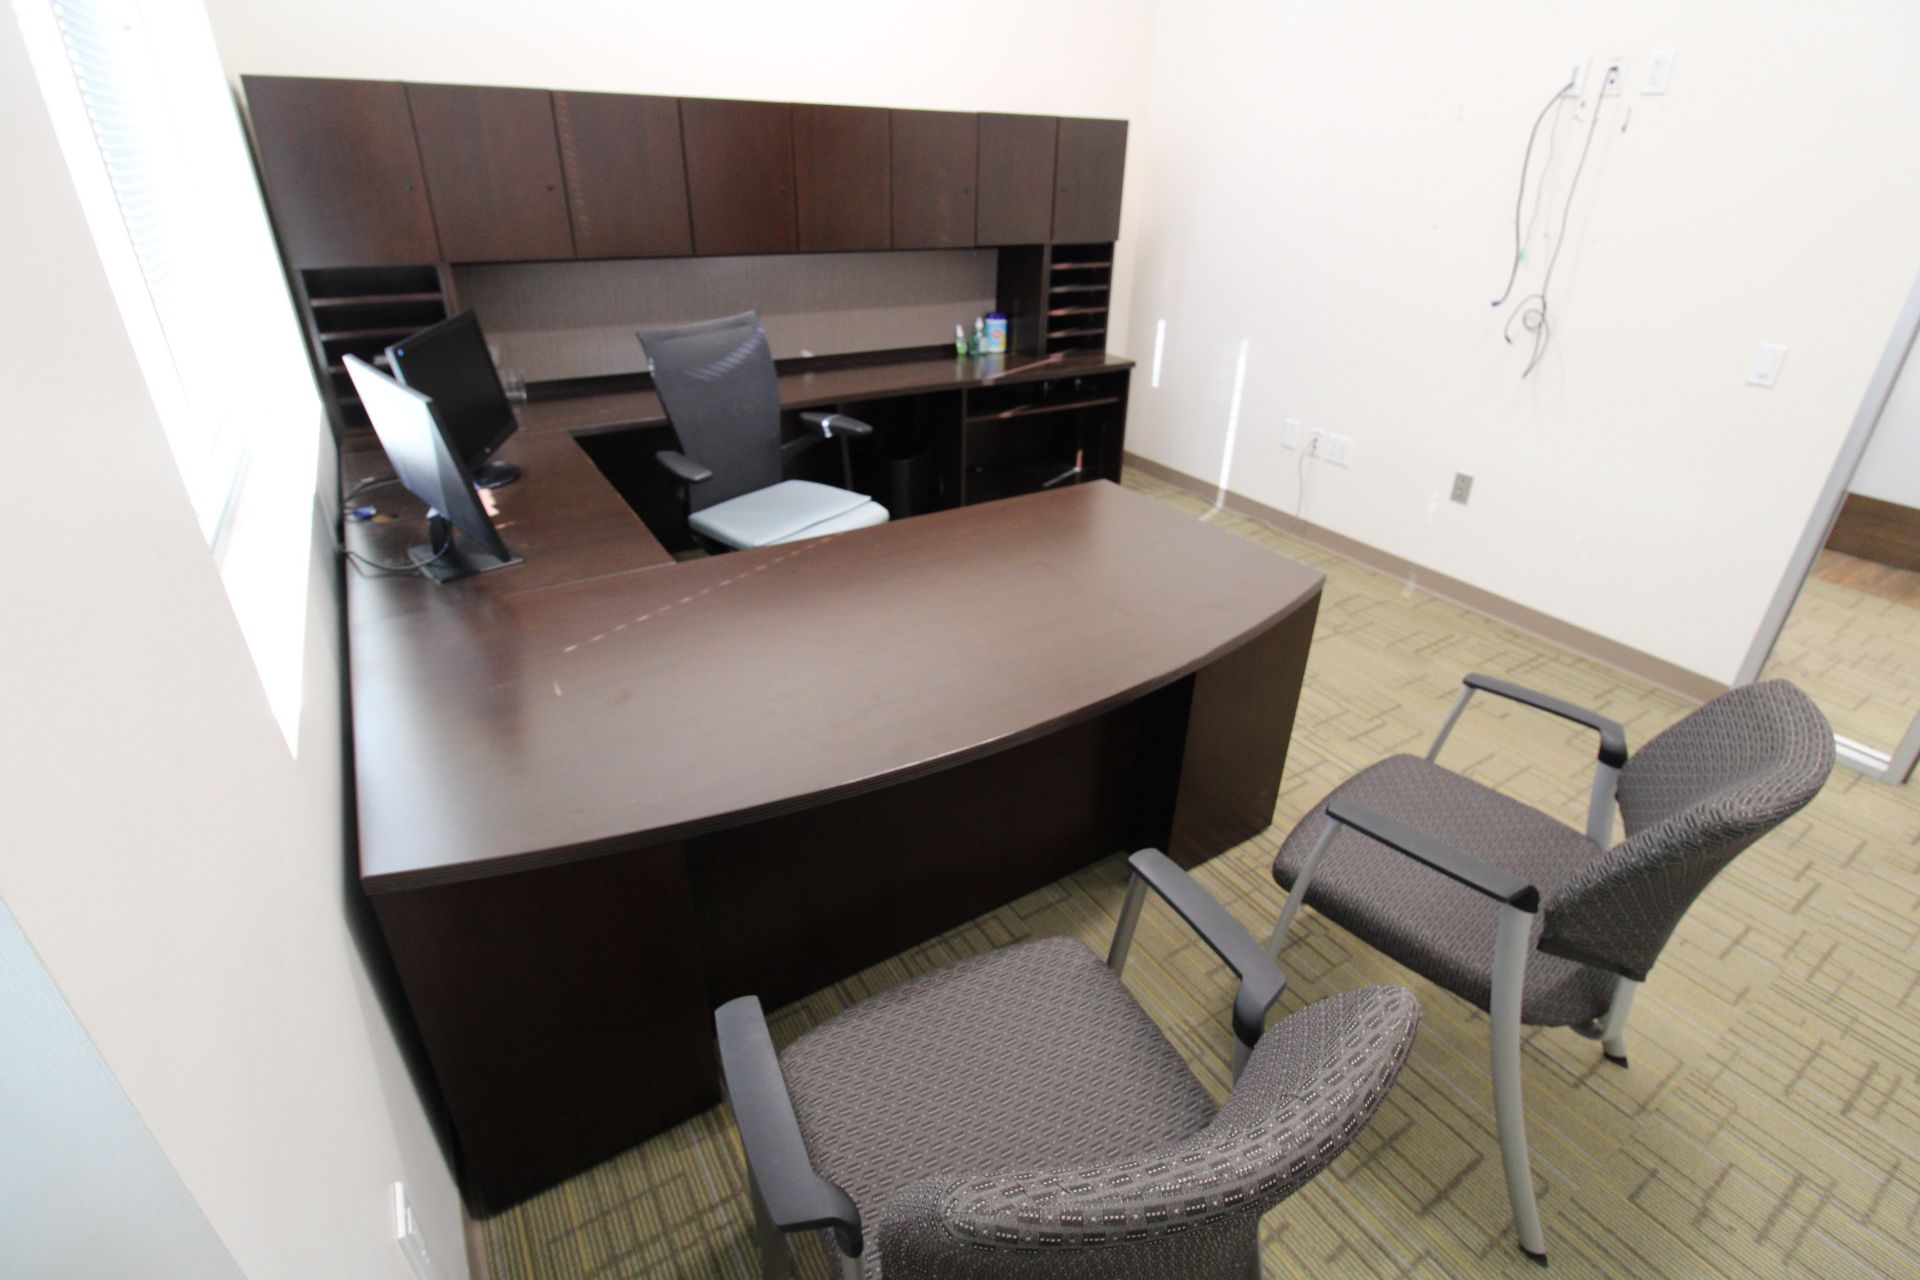 LOT OF DESK, CREDENZA, CHAIRS AND MONITORS - Image 3 of 3